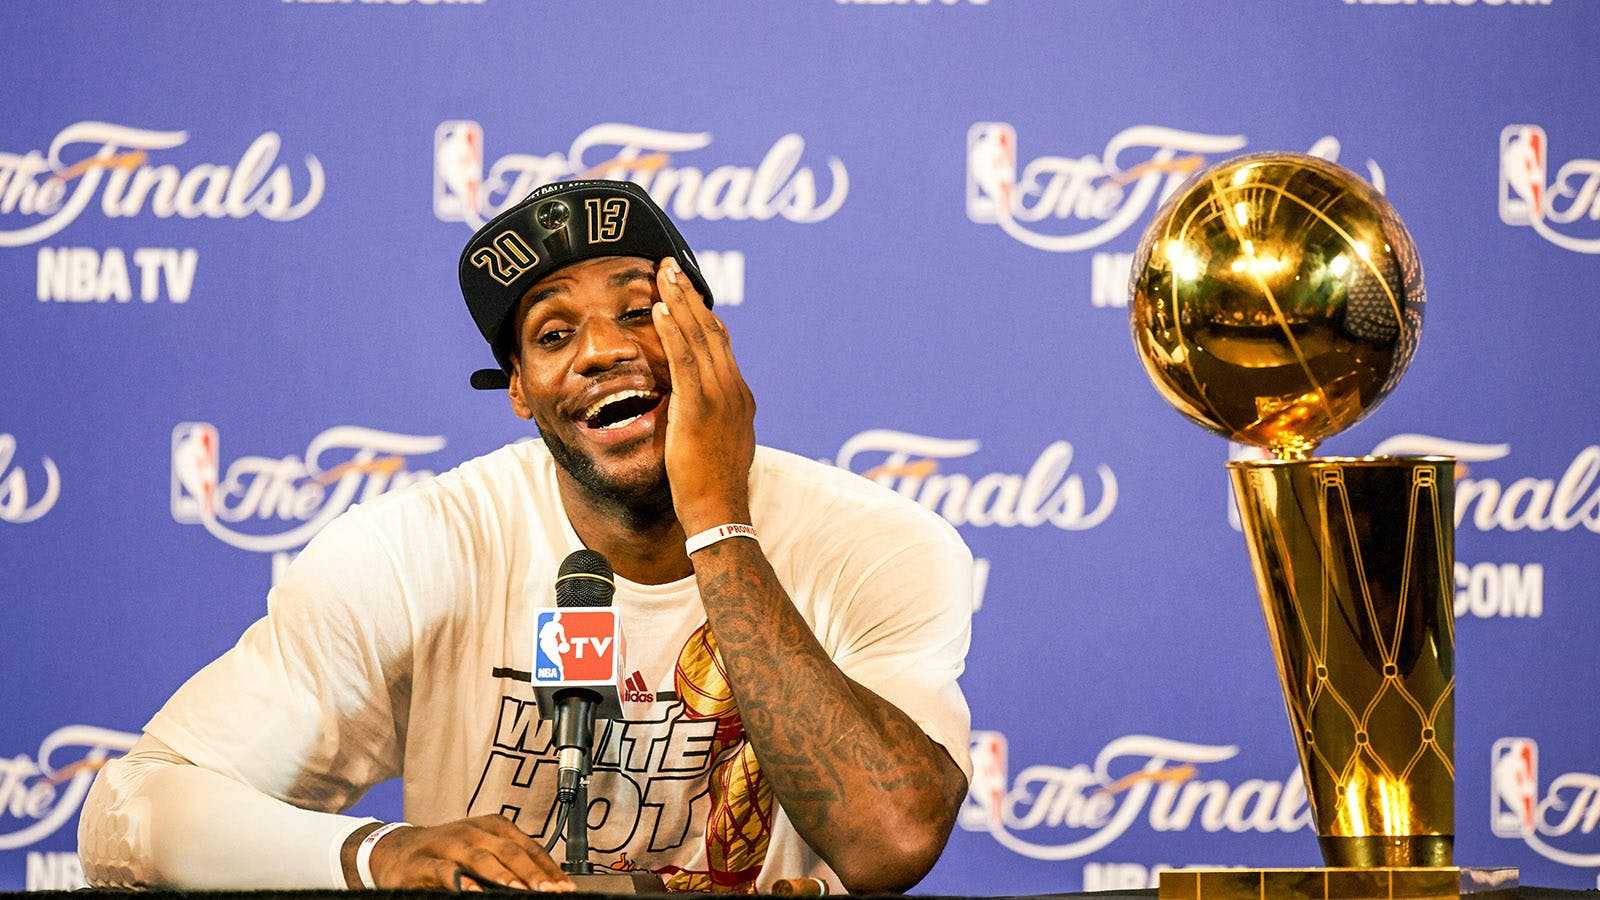  LeBron’s Championships: Which Franchise Will He Be Remembered With Most?